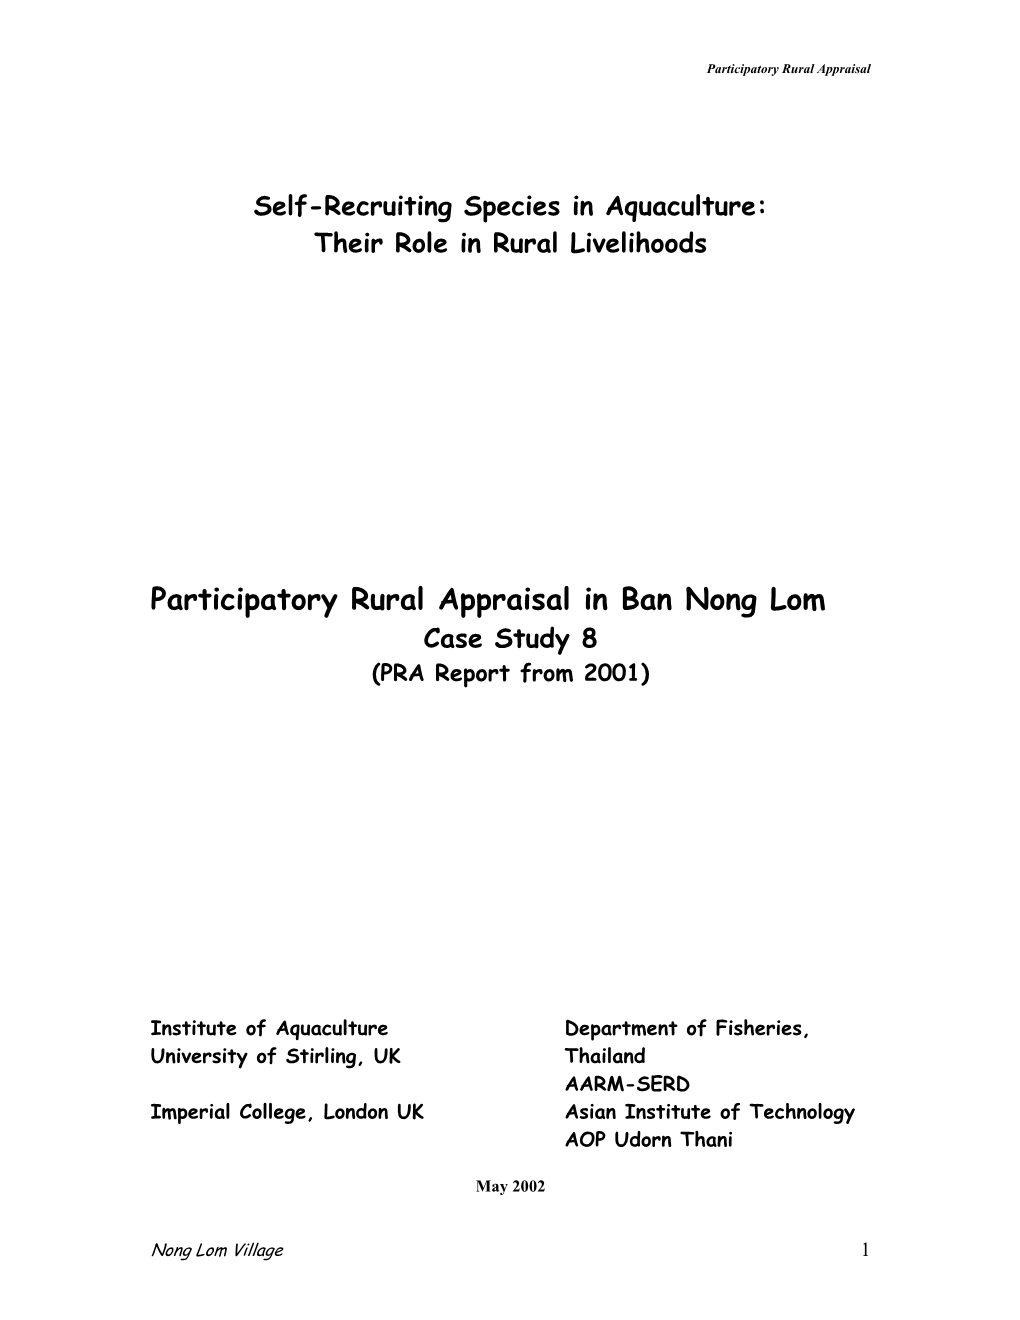 Participatory Rural Appraisal in Ban Nong Lom Case Study 8 (PRA Report from 2001)